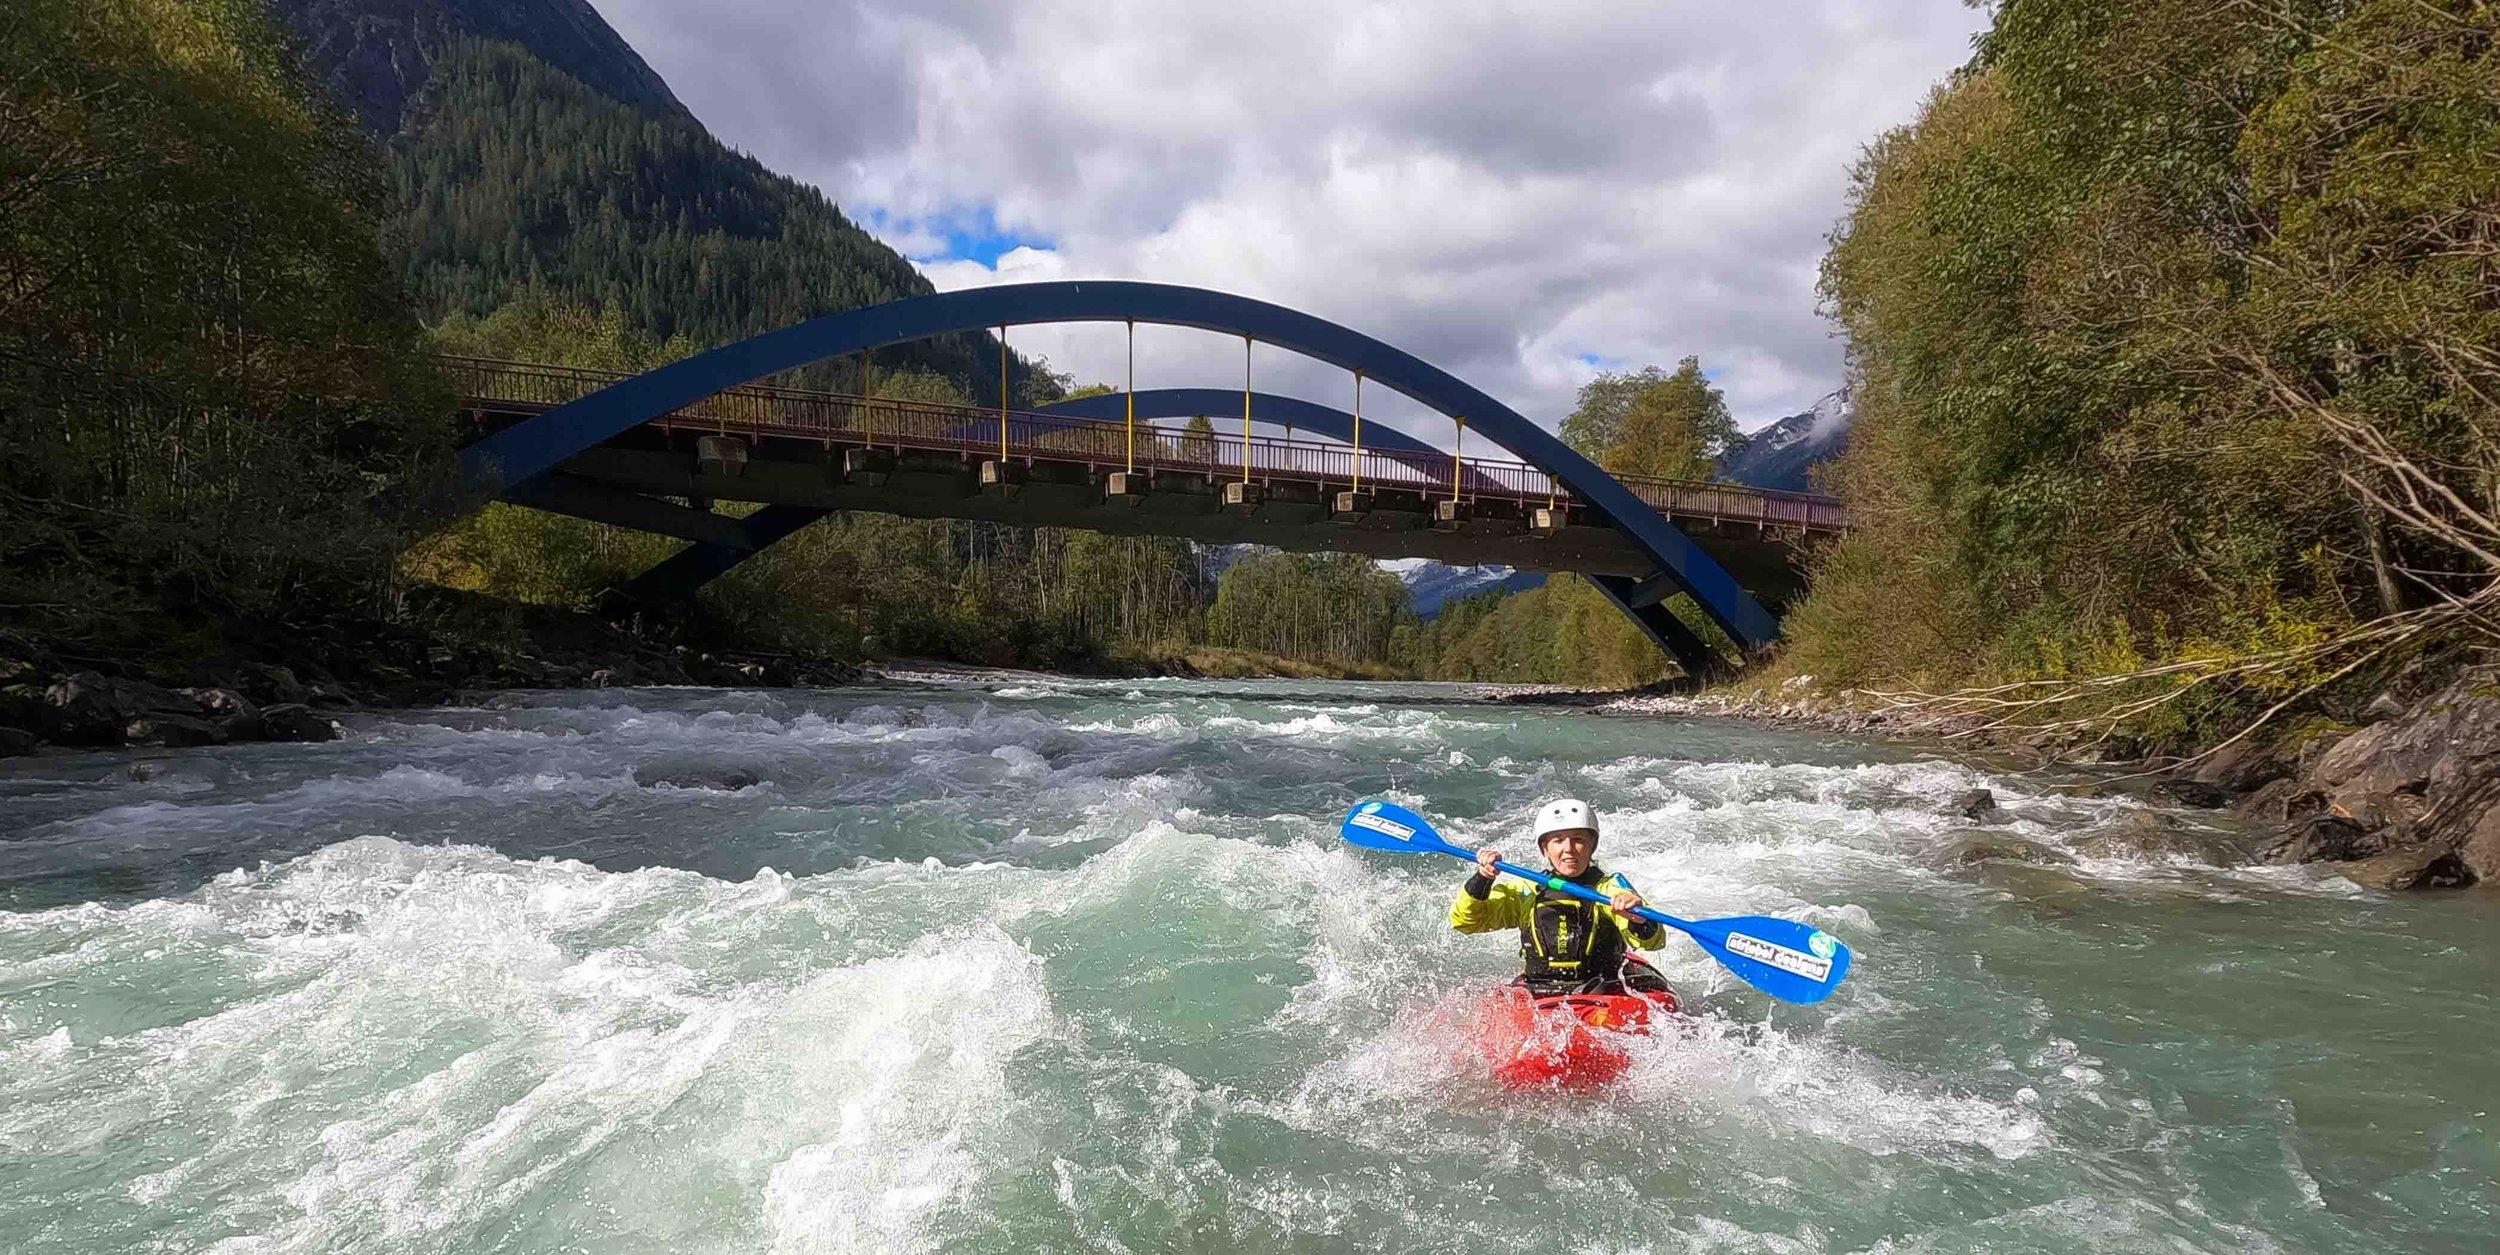 Class 2 Kayaking Courses on River Lech